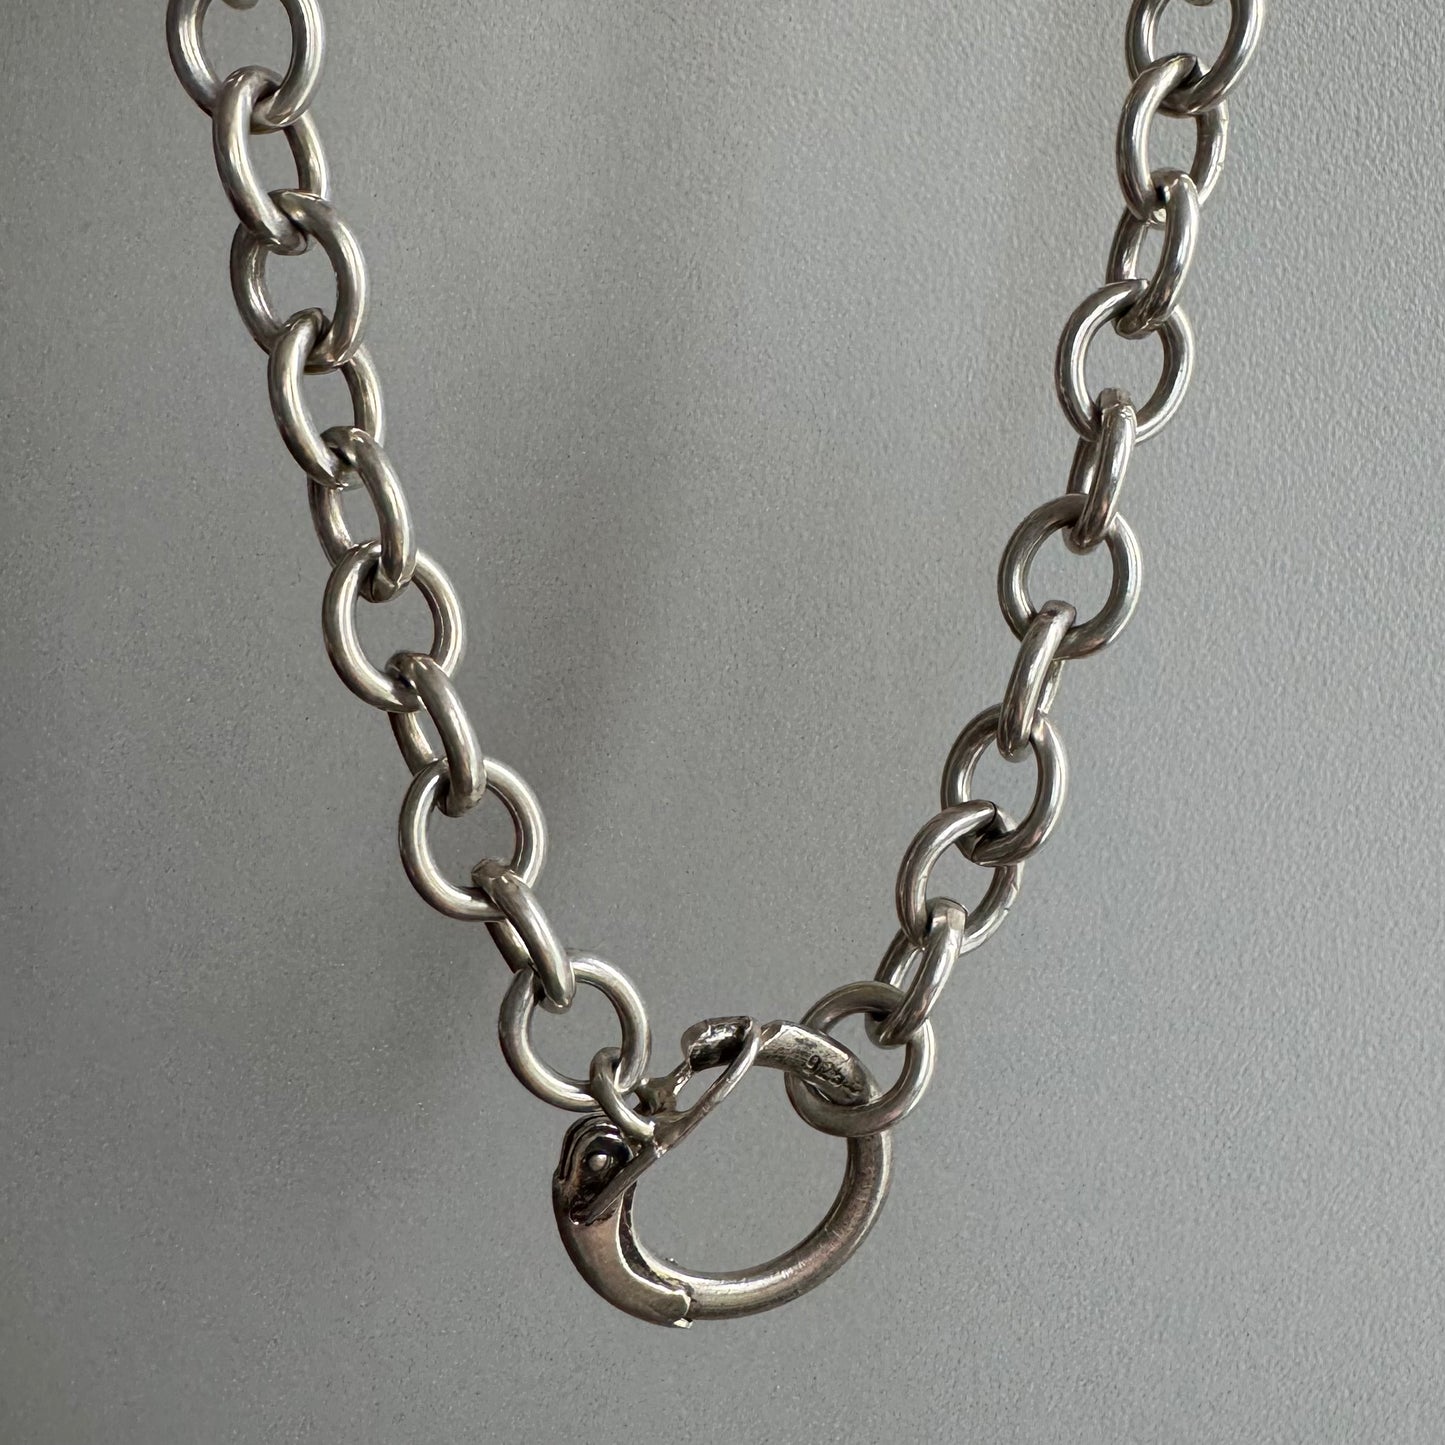 reimagined V I N T A G E // connected possibilities / sterling silver chunky cable chain with connector clasp / 21.5", 53g